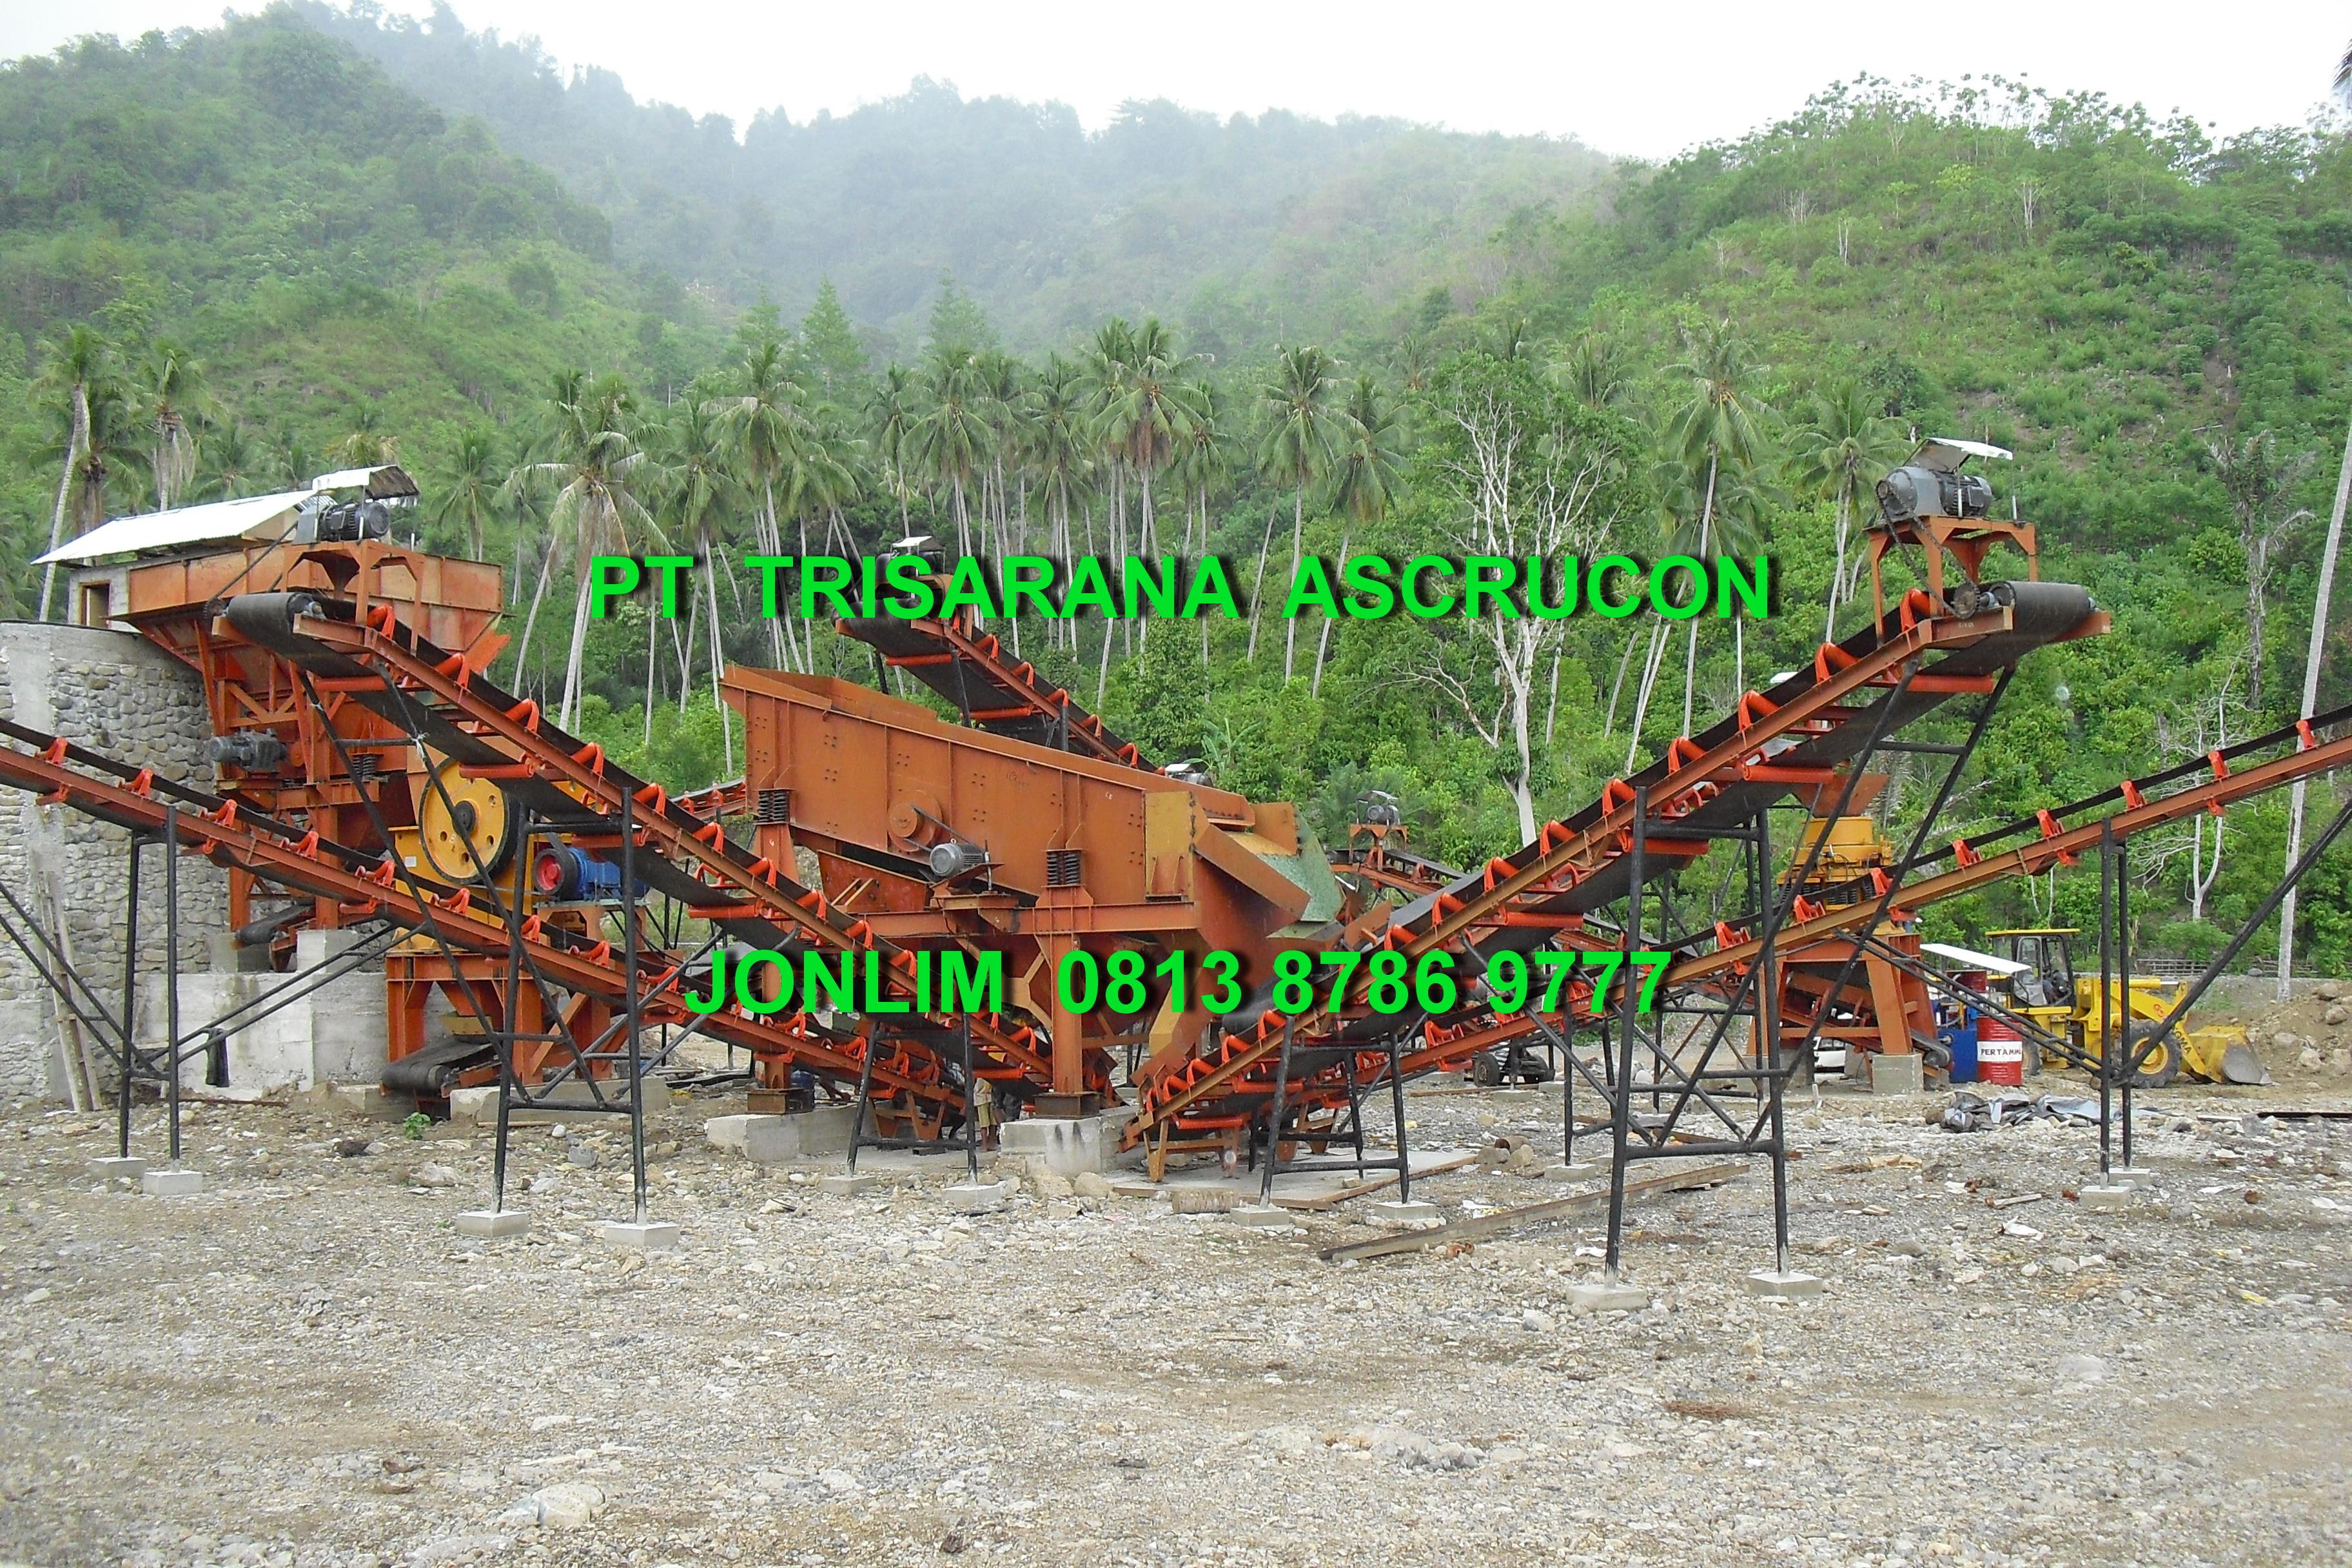 Sell Stone Crusher Plant from Indonesia by PT Trisarana Ascrucon,Cheap